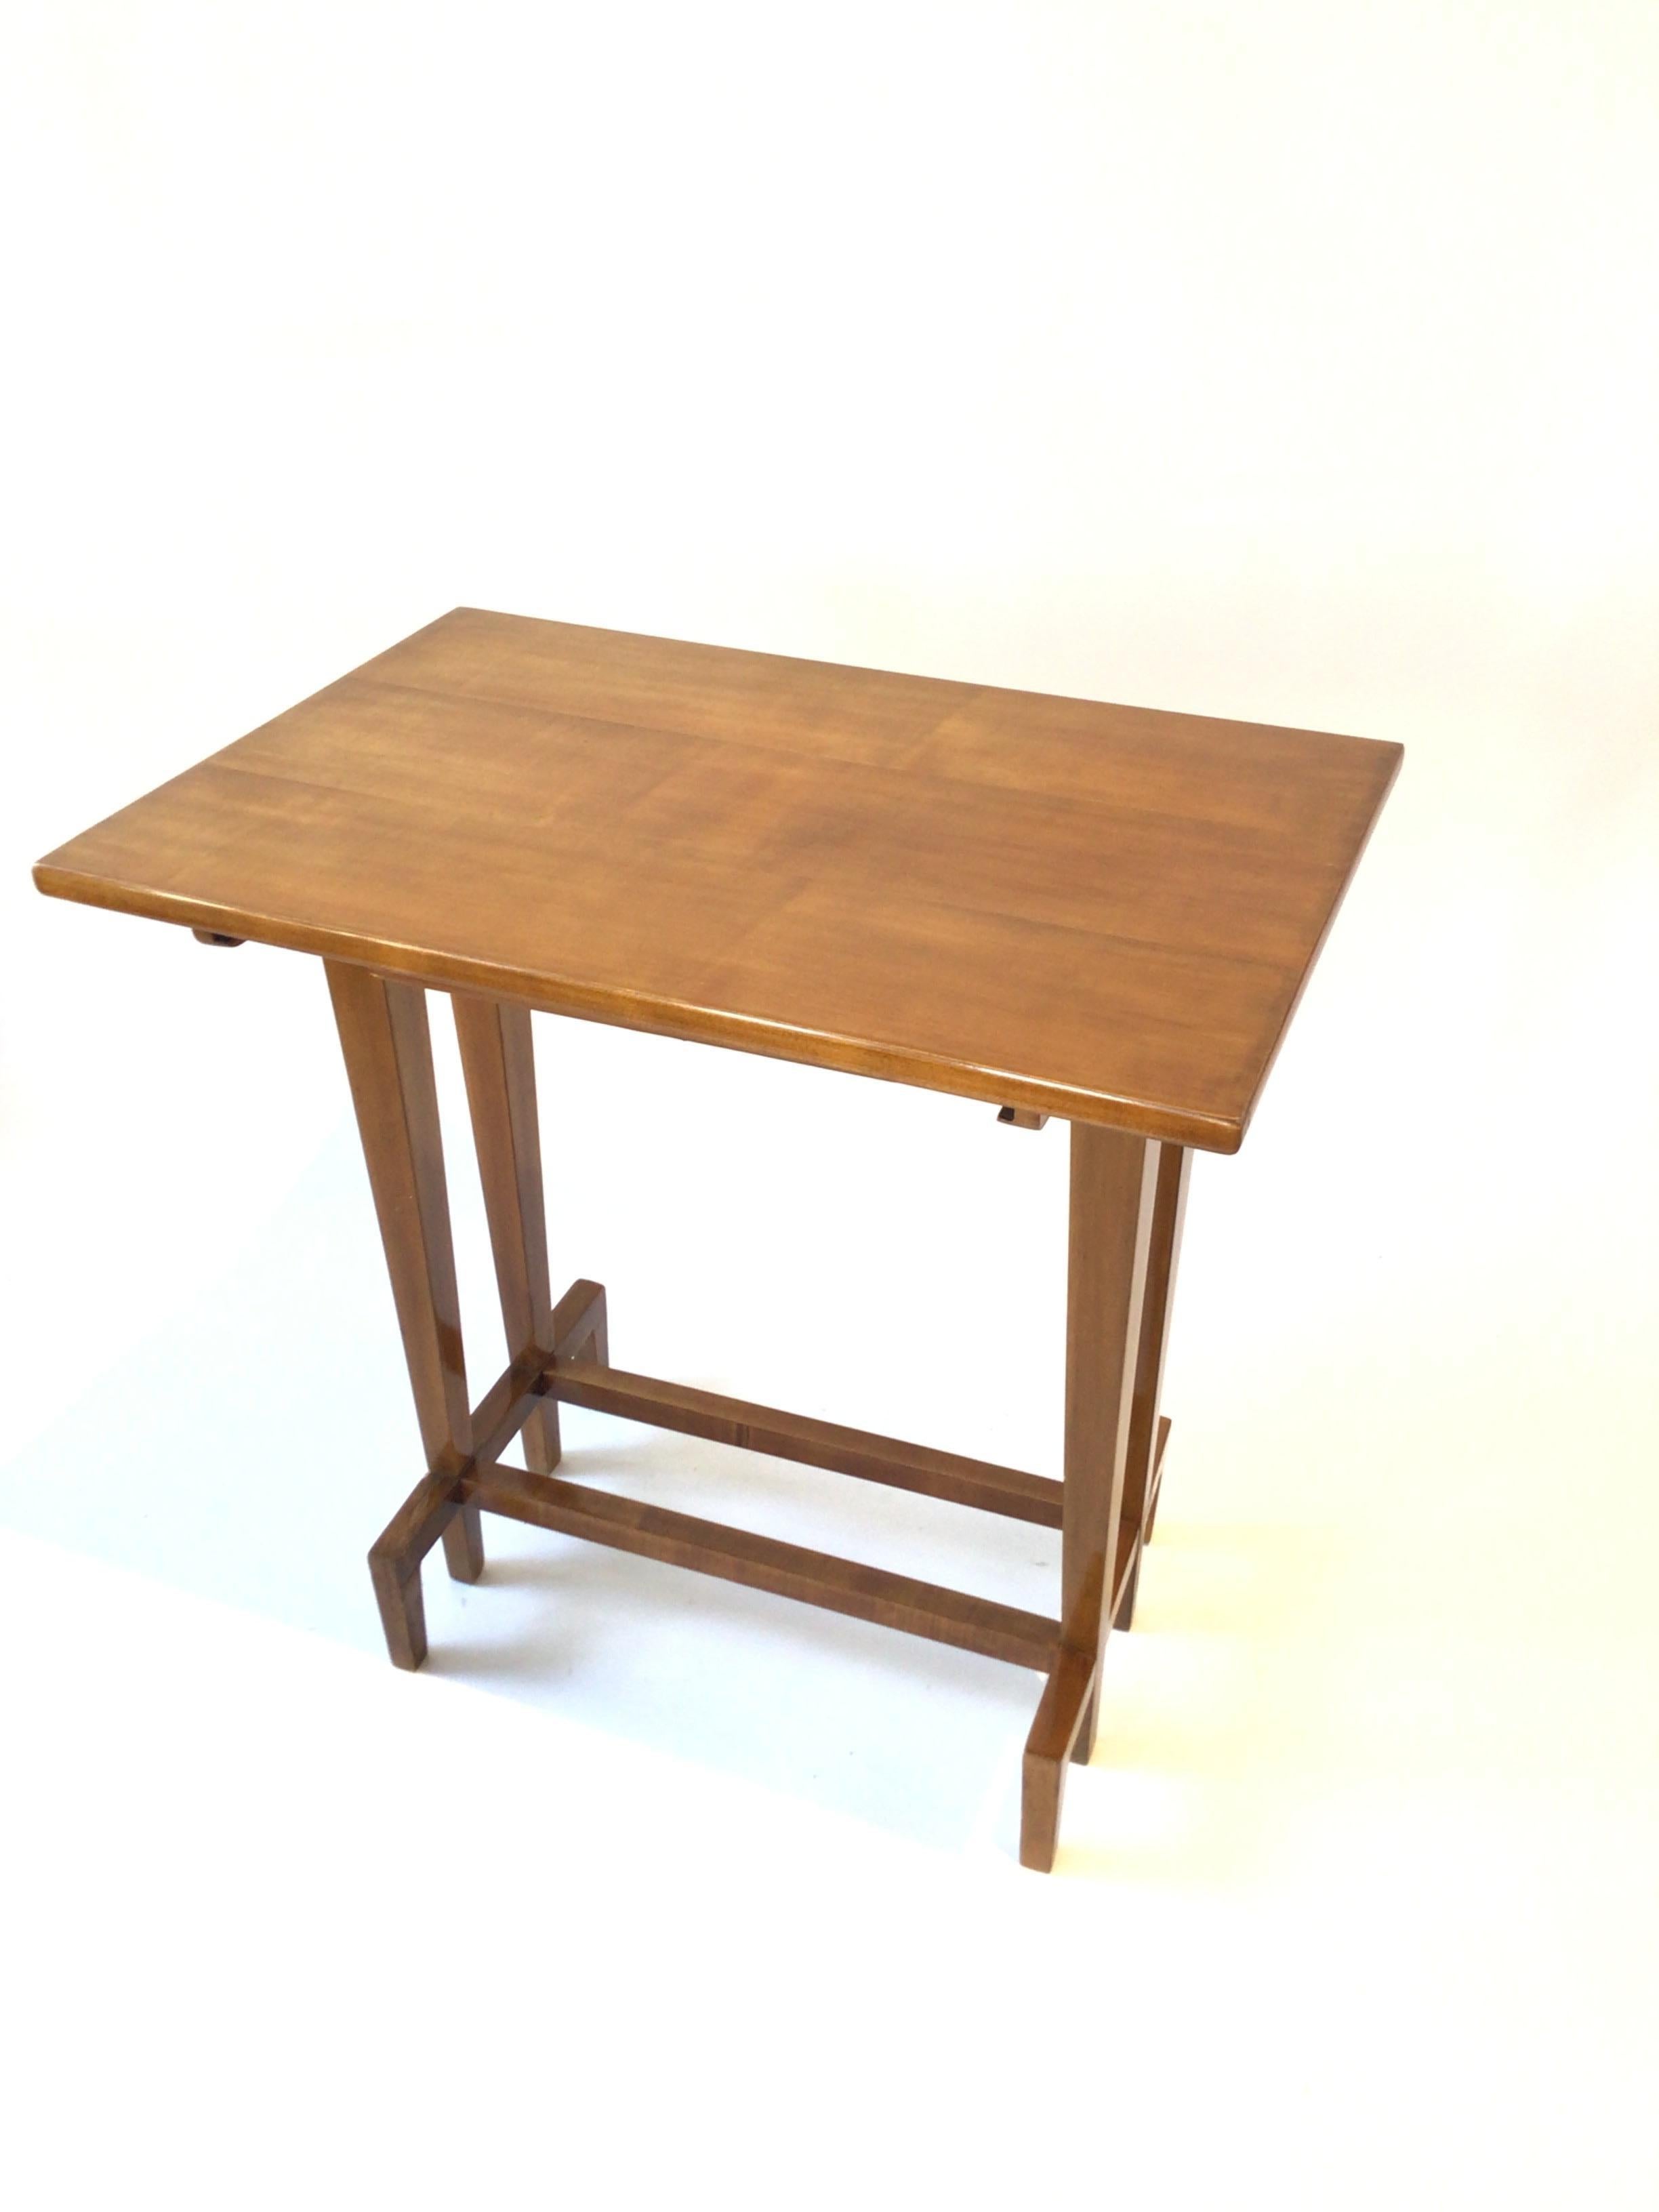 1920s Walnut Architectural Side Table In Good Condition For Sale In Tarrytown, NY